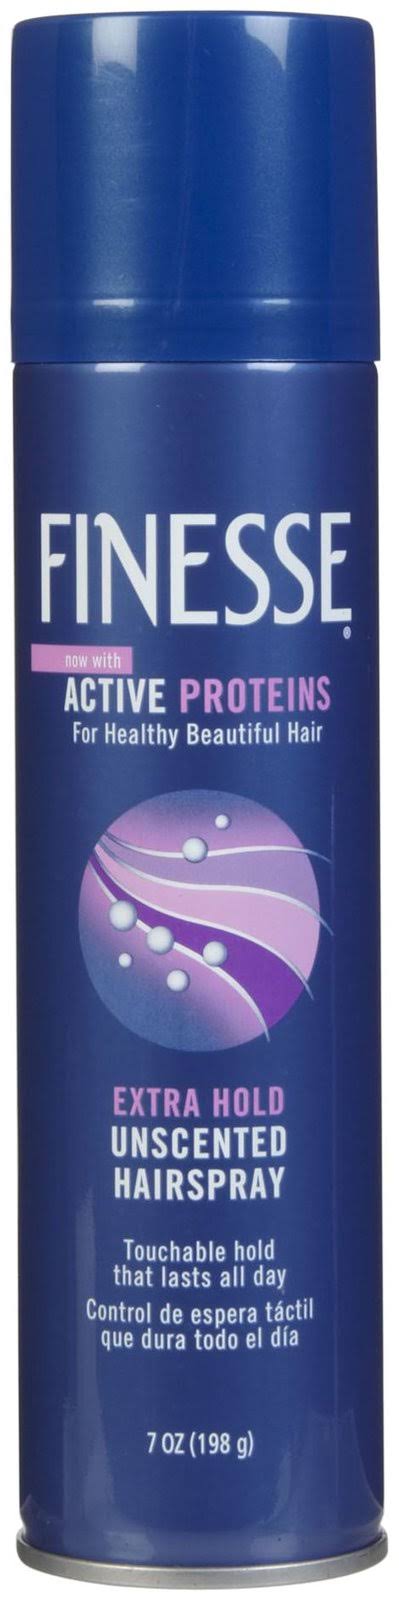 Finesse Unscented Hairspray - Xtra Hold, 205ml